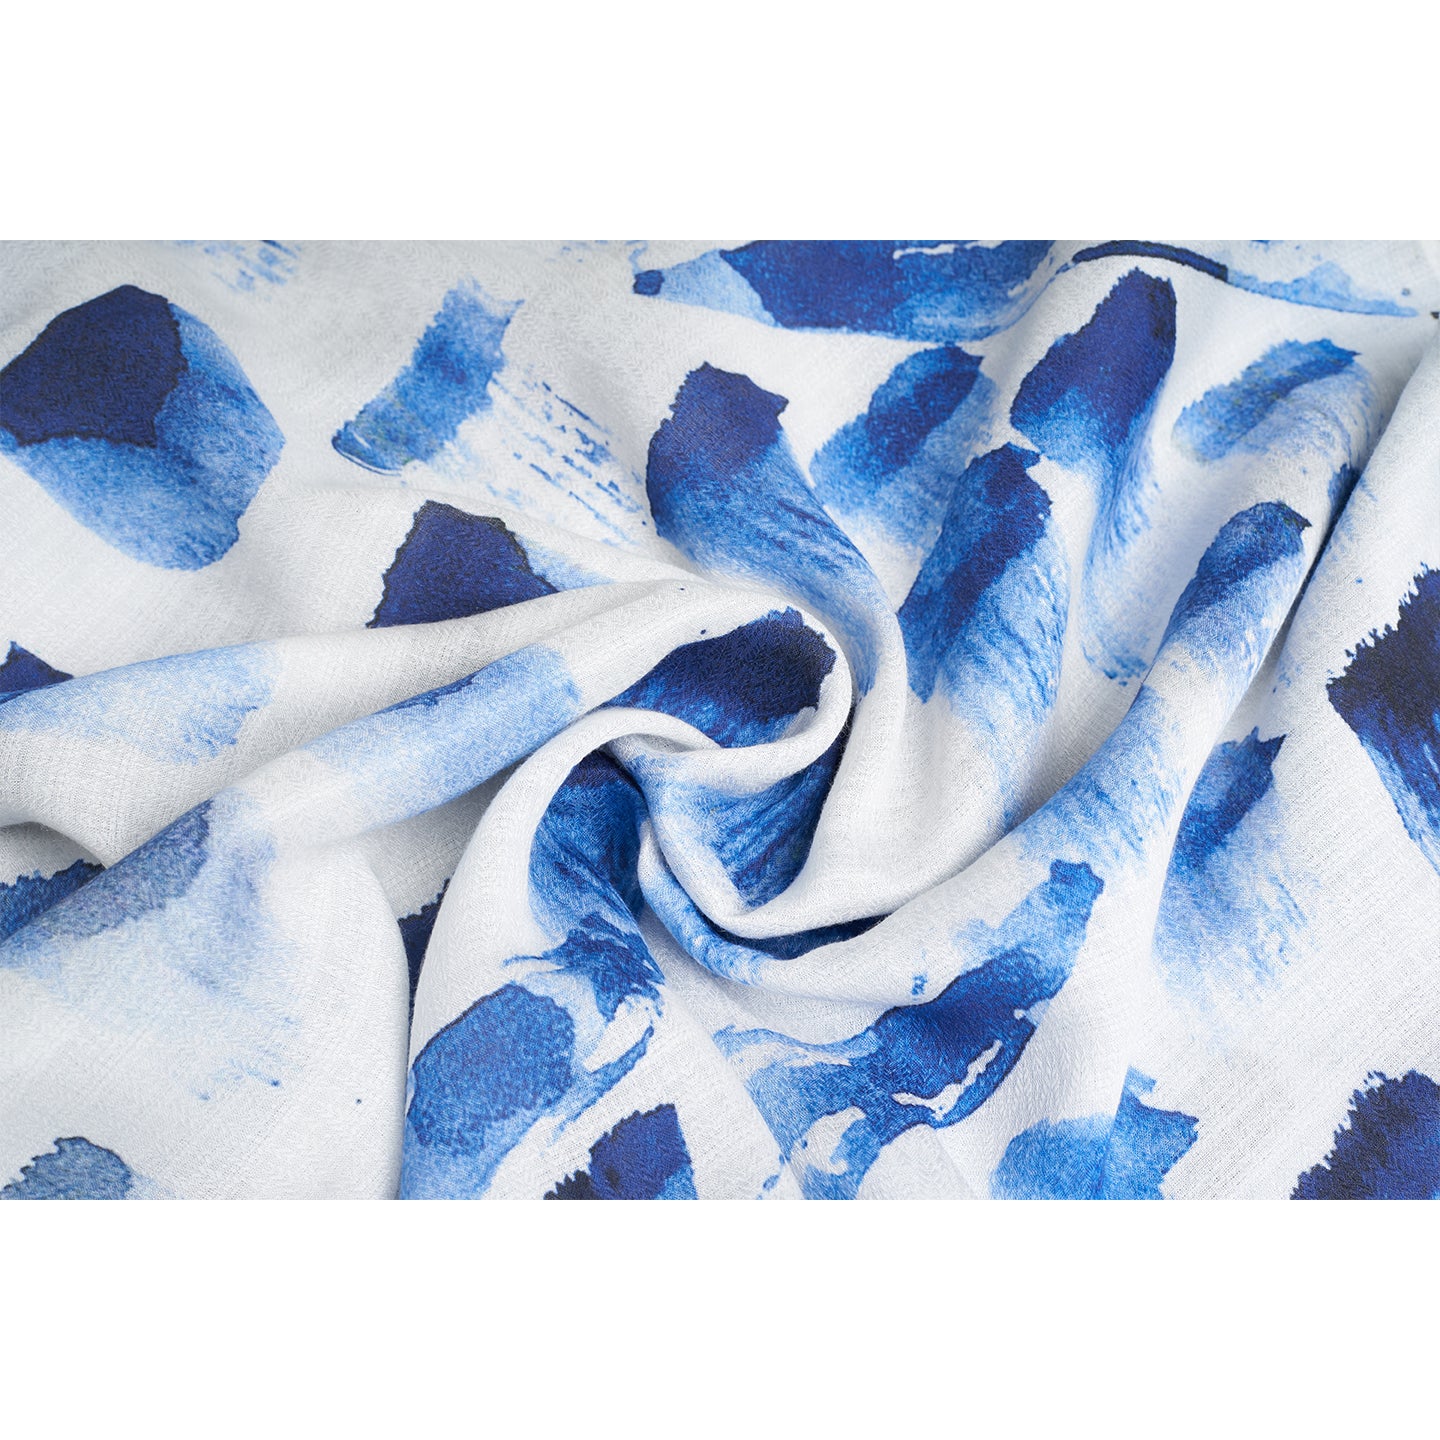 A Rectangular scarf made from organic rose petal fabric printed with non toxic GOTS certified inks. the print is inspired from paint brush strokes and leaves in blue, navy , white and black color..